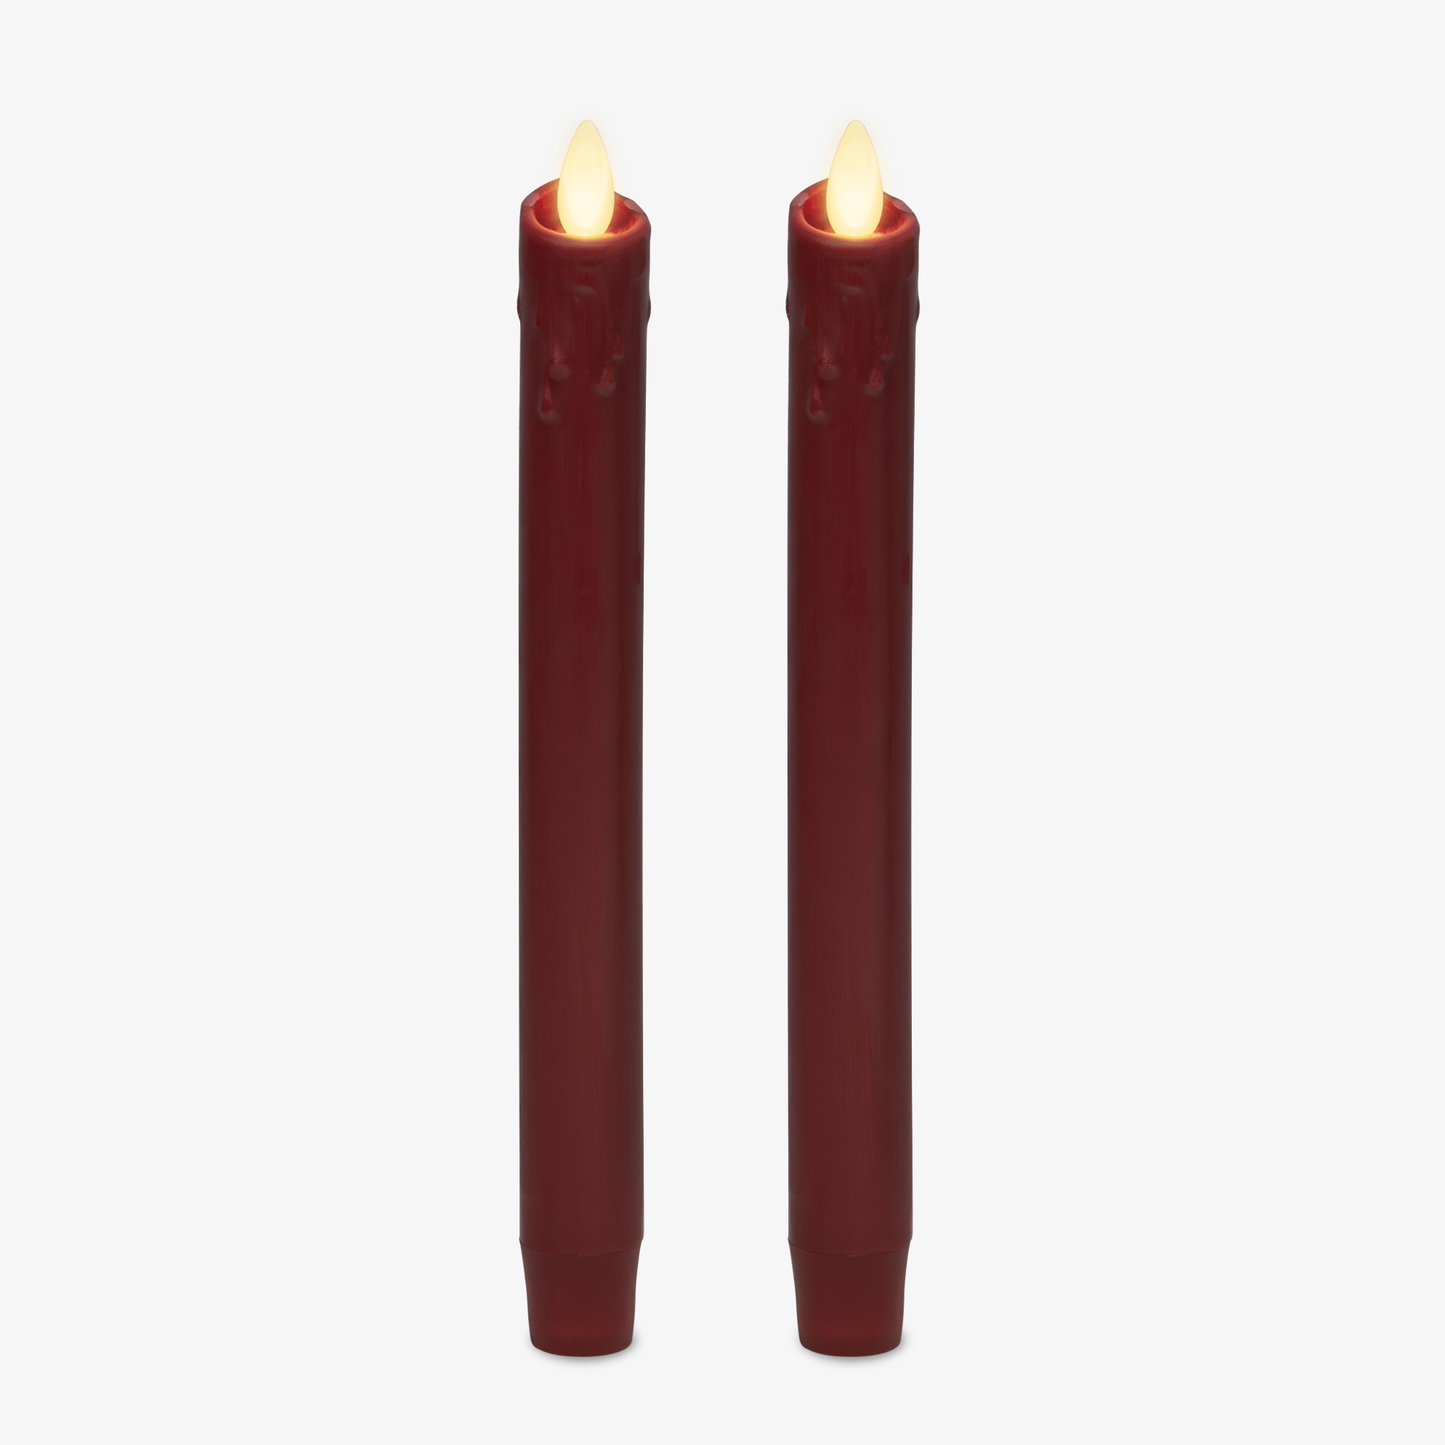 Set of 2 Burgundy Wax Drip Flameless Candle Tapers - Scallop Top